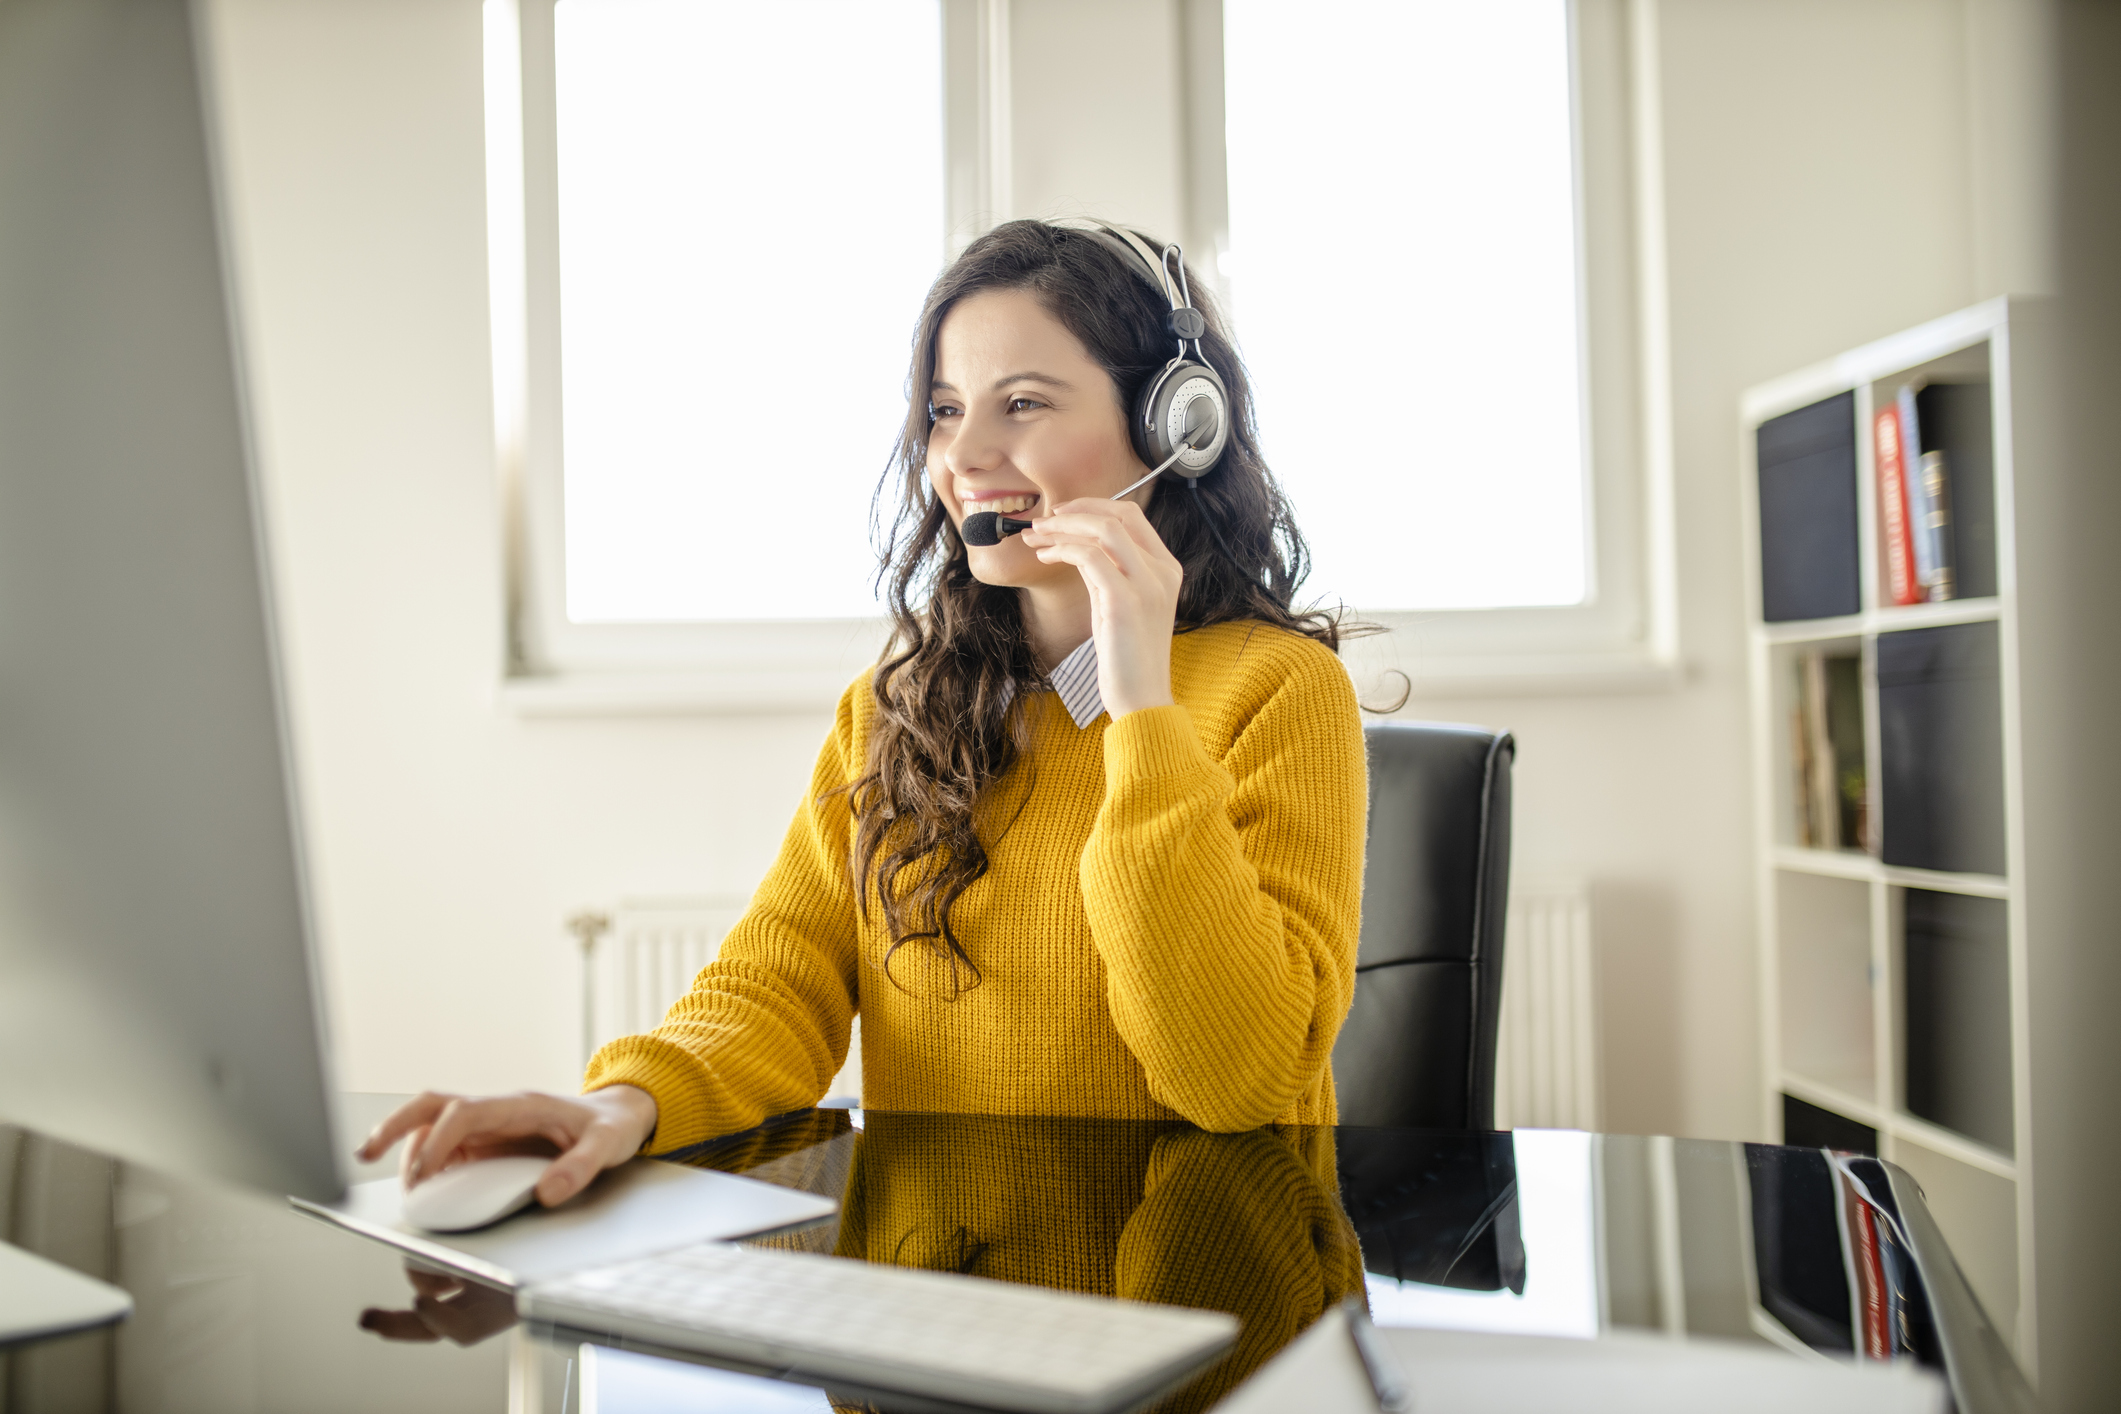 Smiling female psychologist wearing headset looking at camera. Remote online medical chat consultation, telemedicine distance services, virtual physician conference call concept